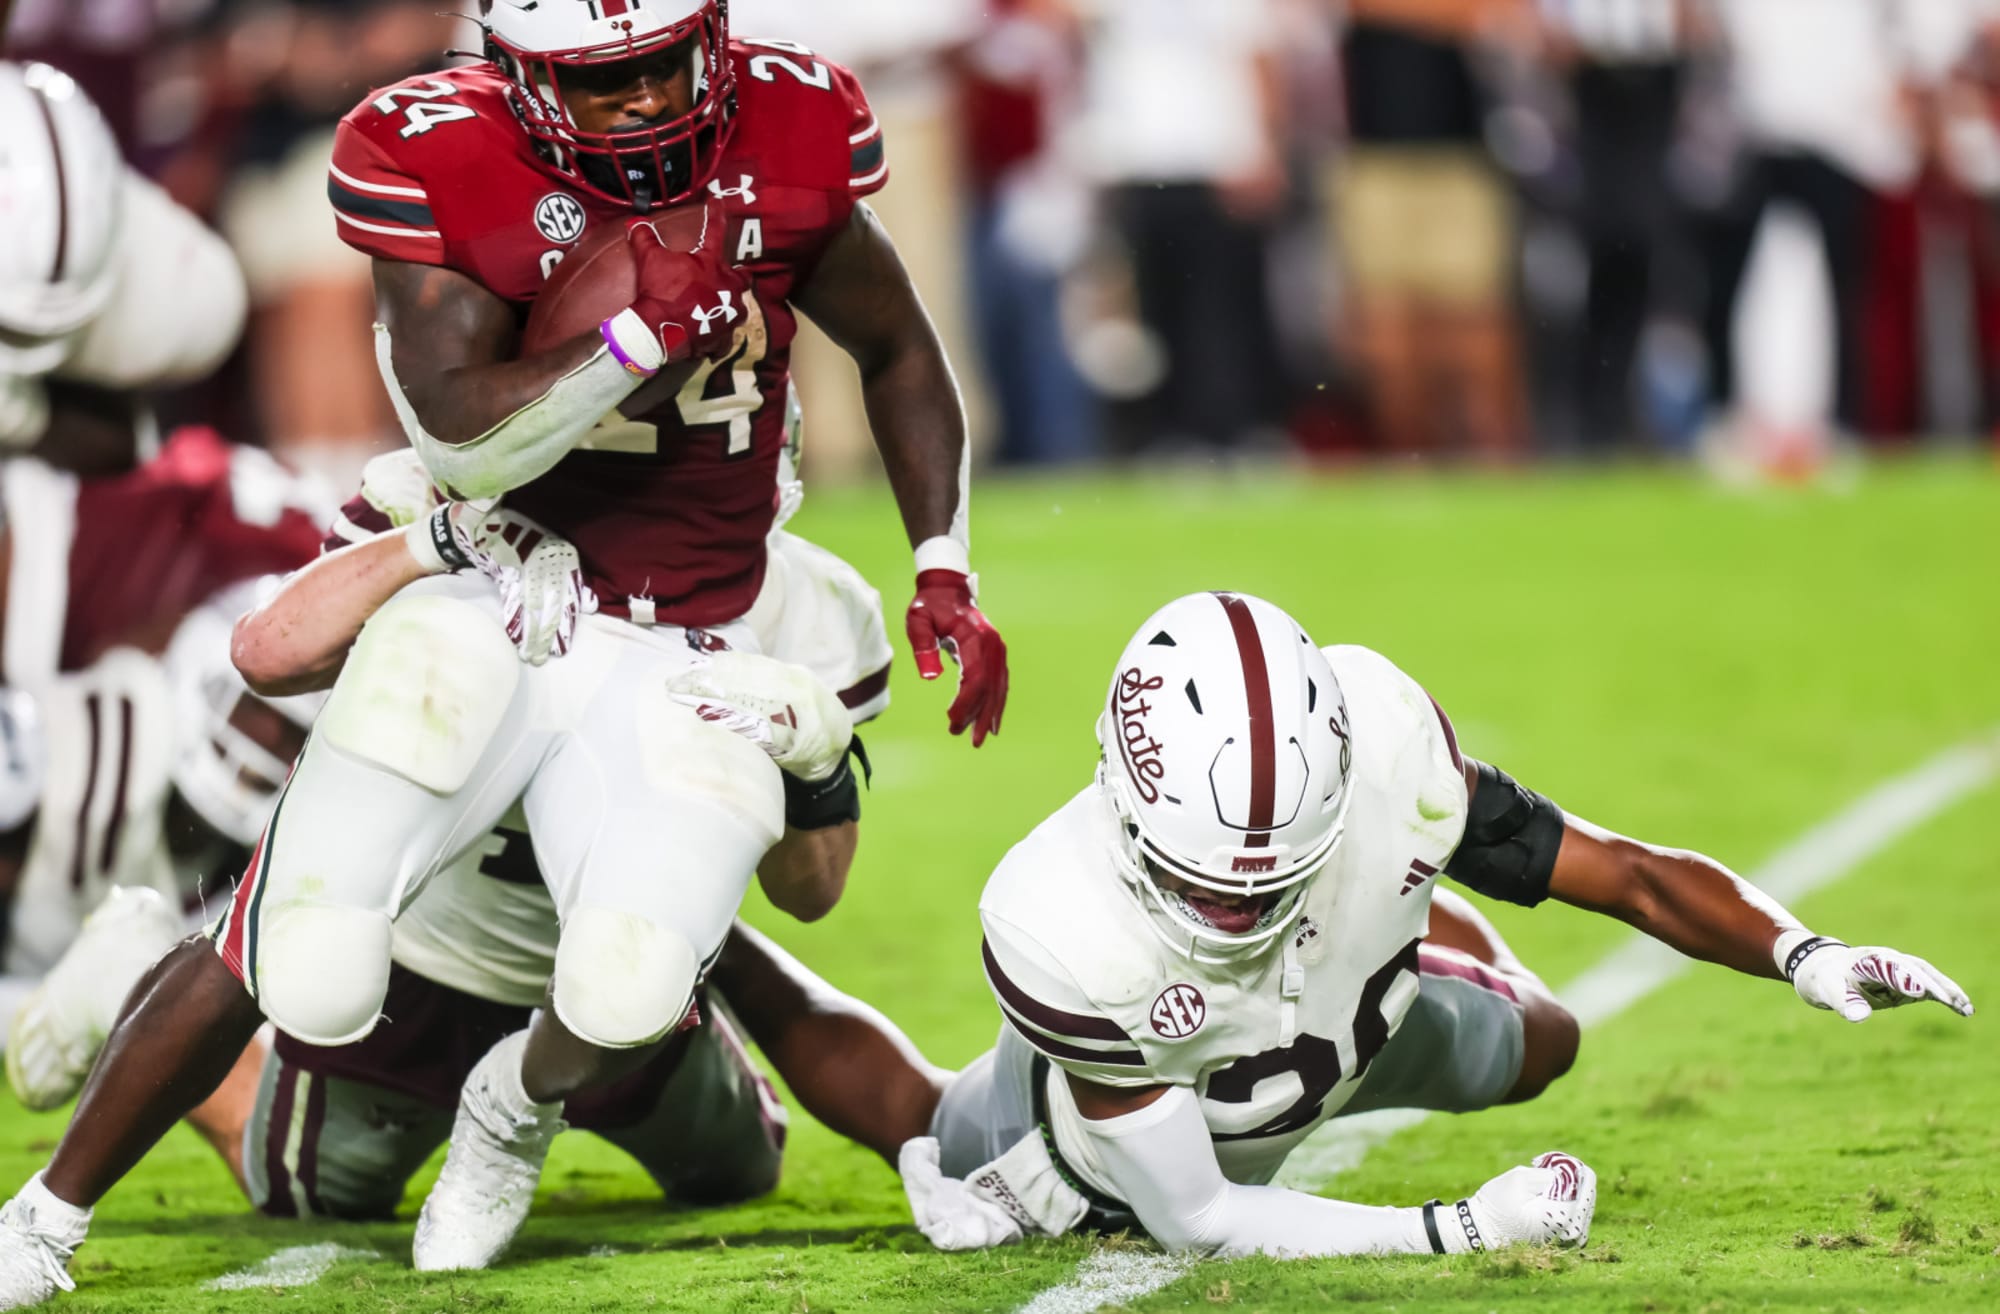 South Carolina Football Fans Thrilled with Personnel Changes in Team's